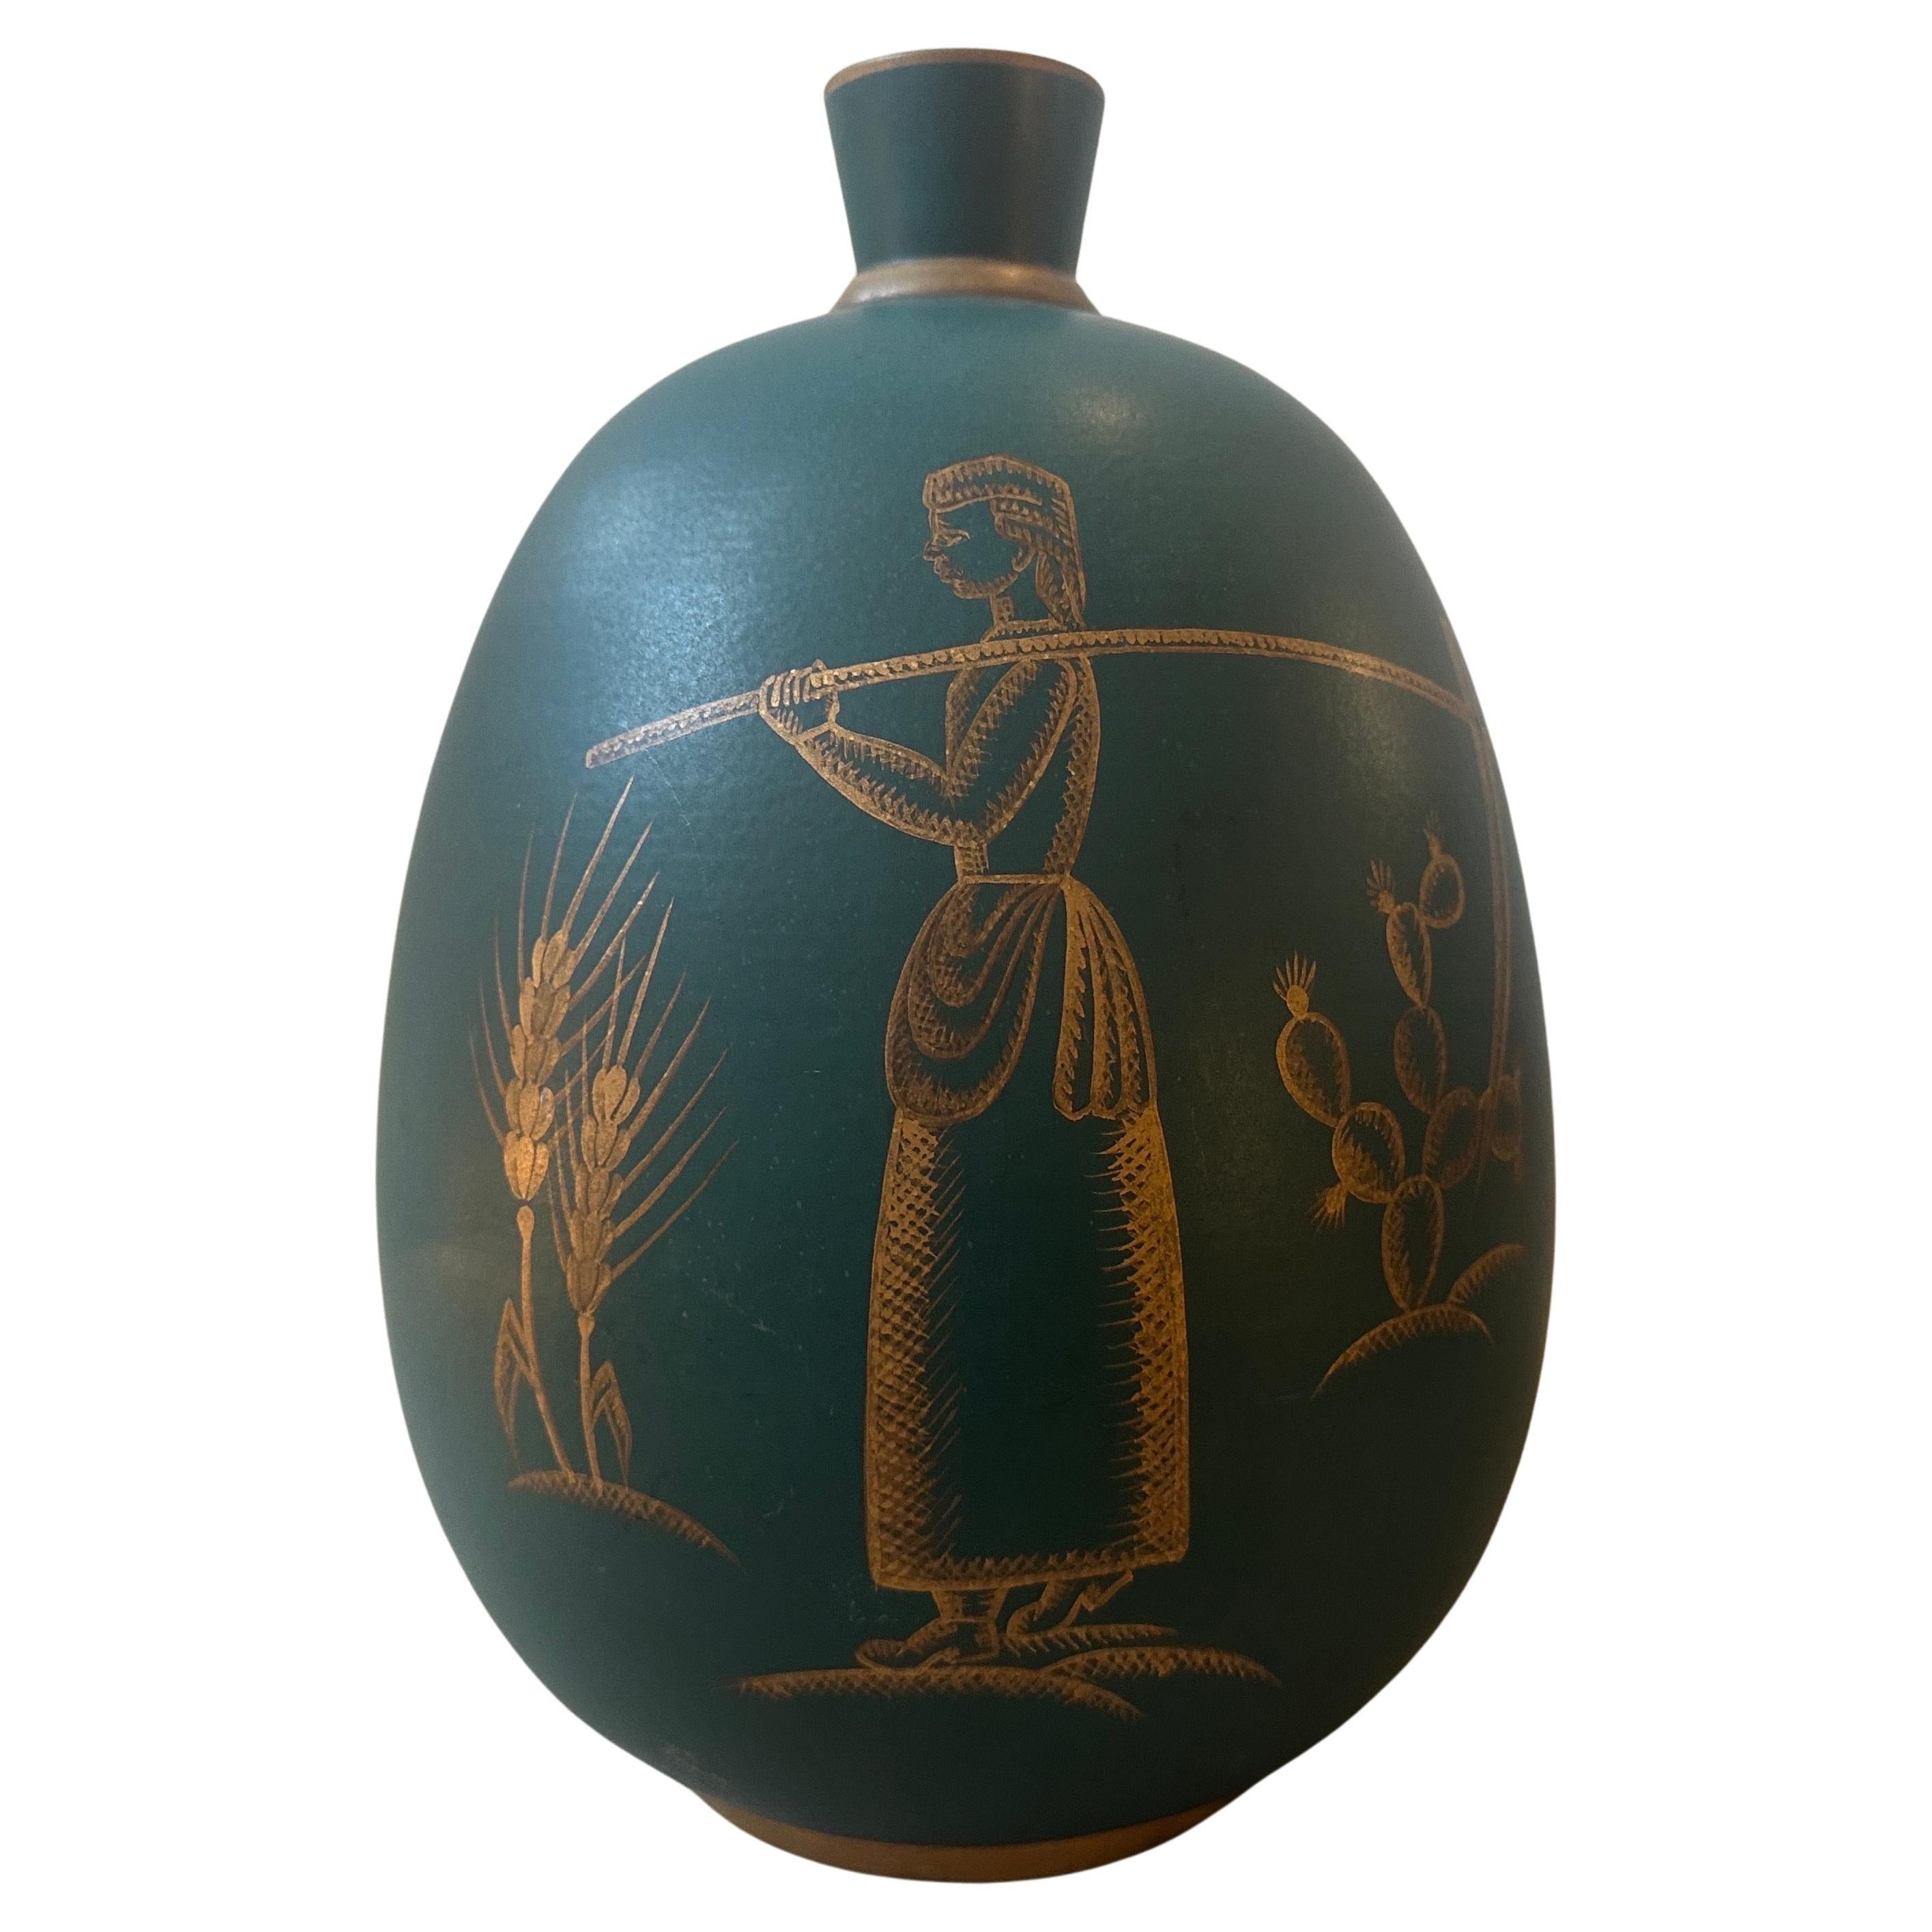 A 1939 Dated Art Deco Gio Ponti Inspired Green and Gold Ceramic Sicilian Vase For Sale